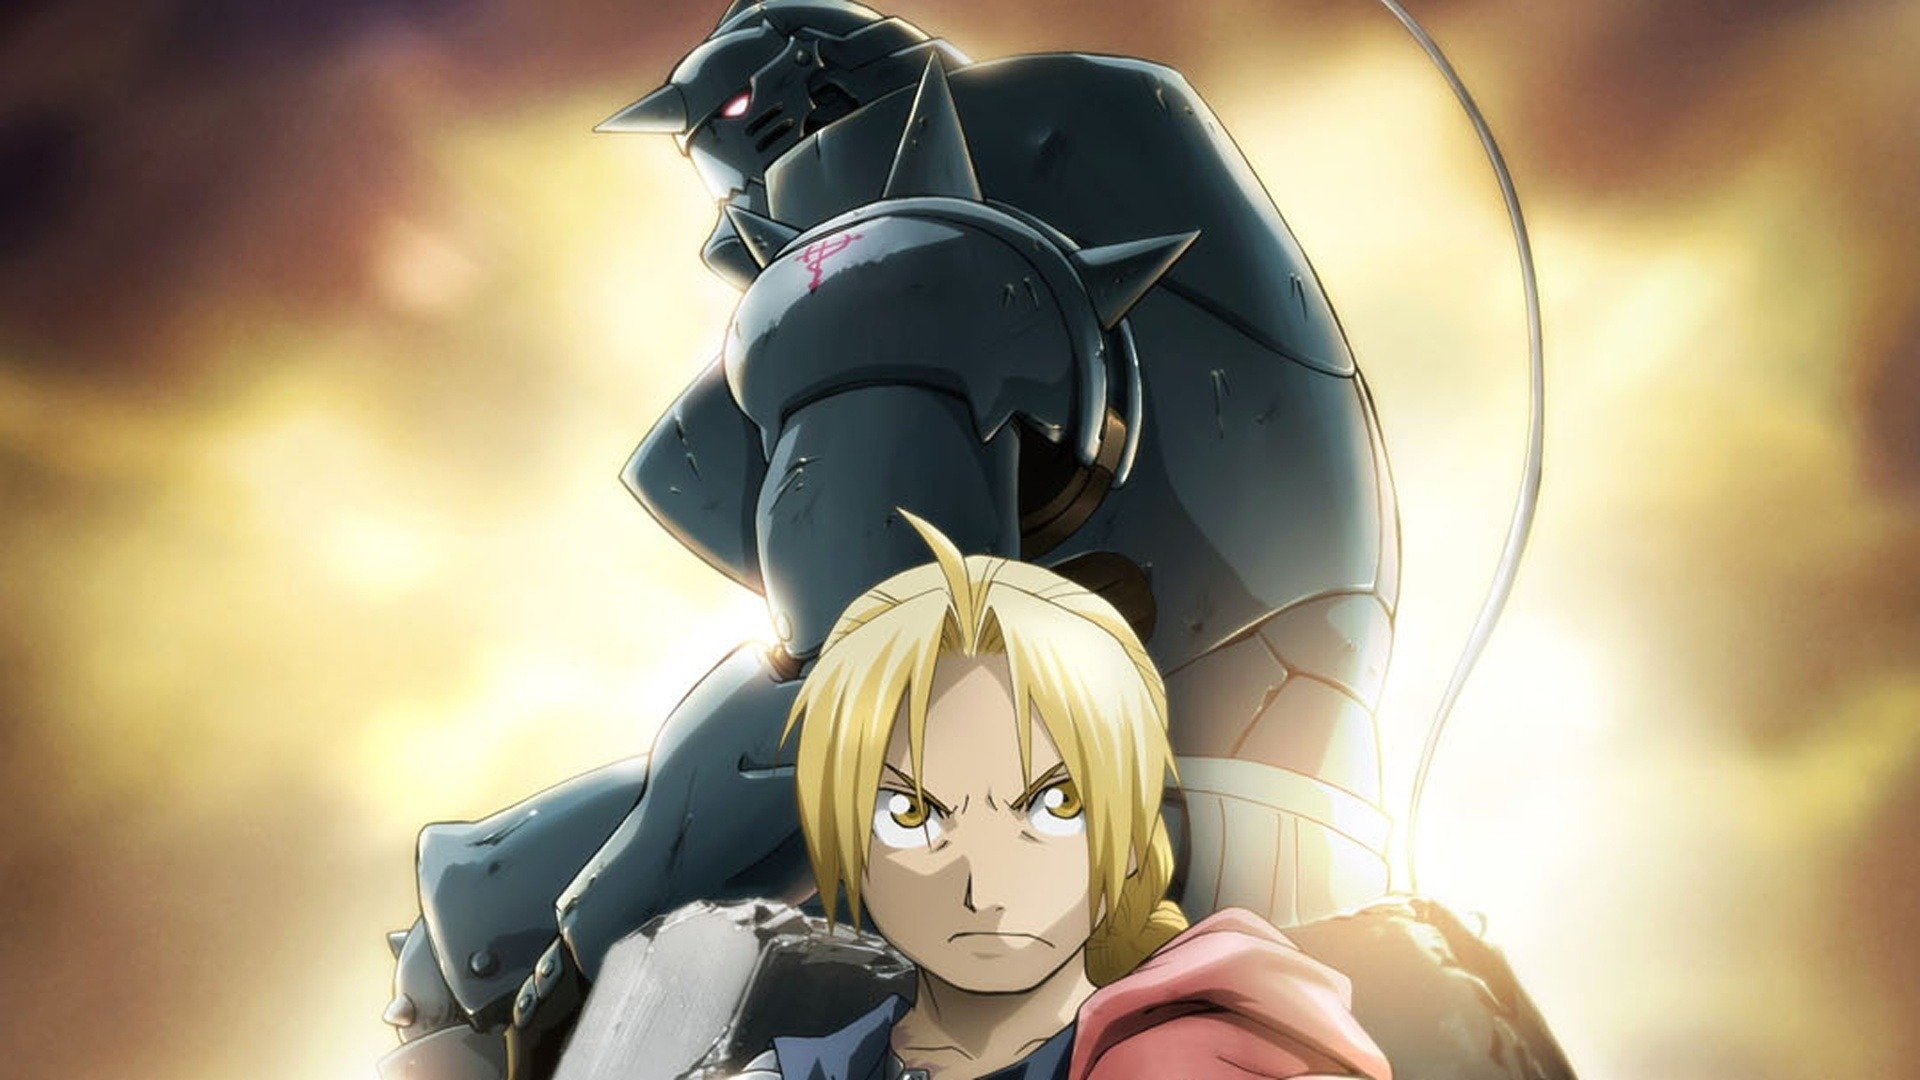 FullMetal Alchemist on Netflix - Will there be a SEQUEL? When's it out?, Films, Entertainment